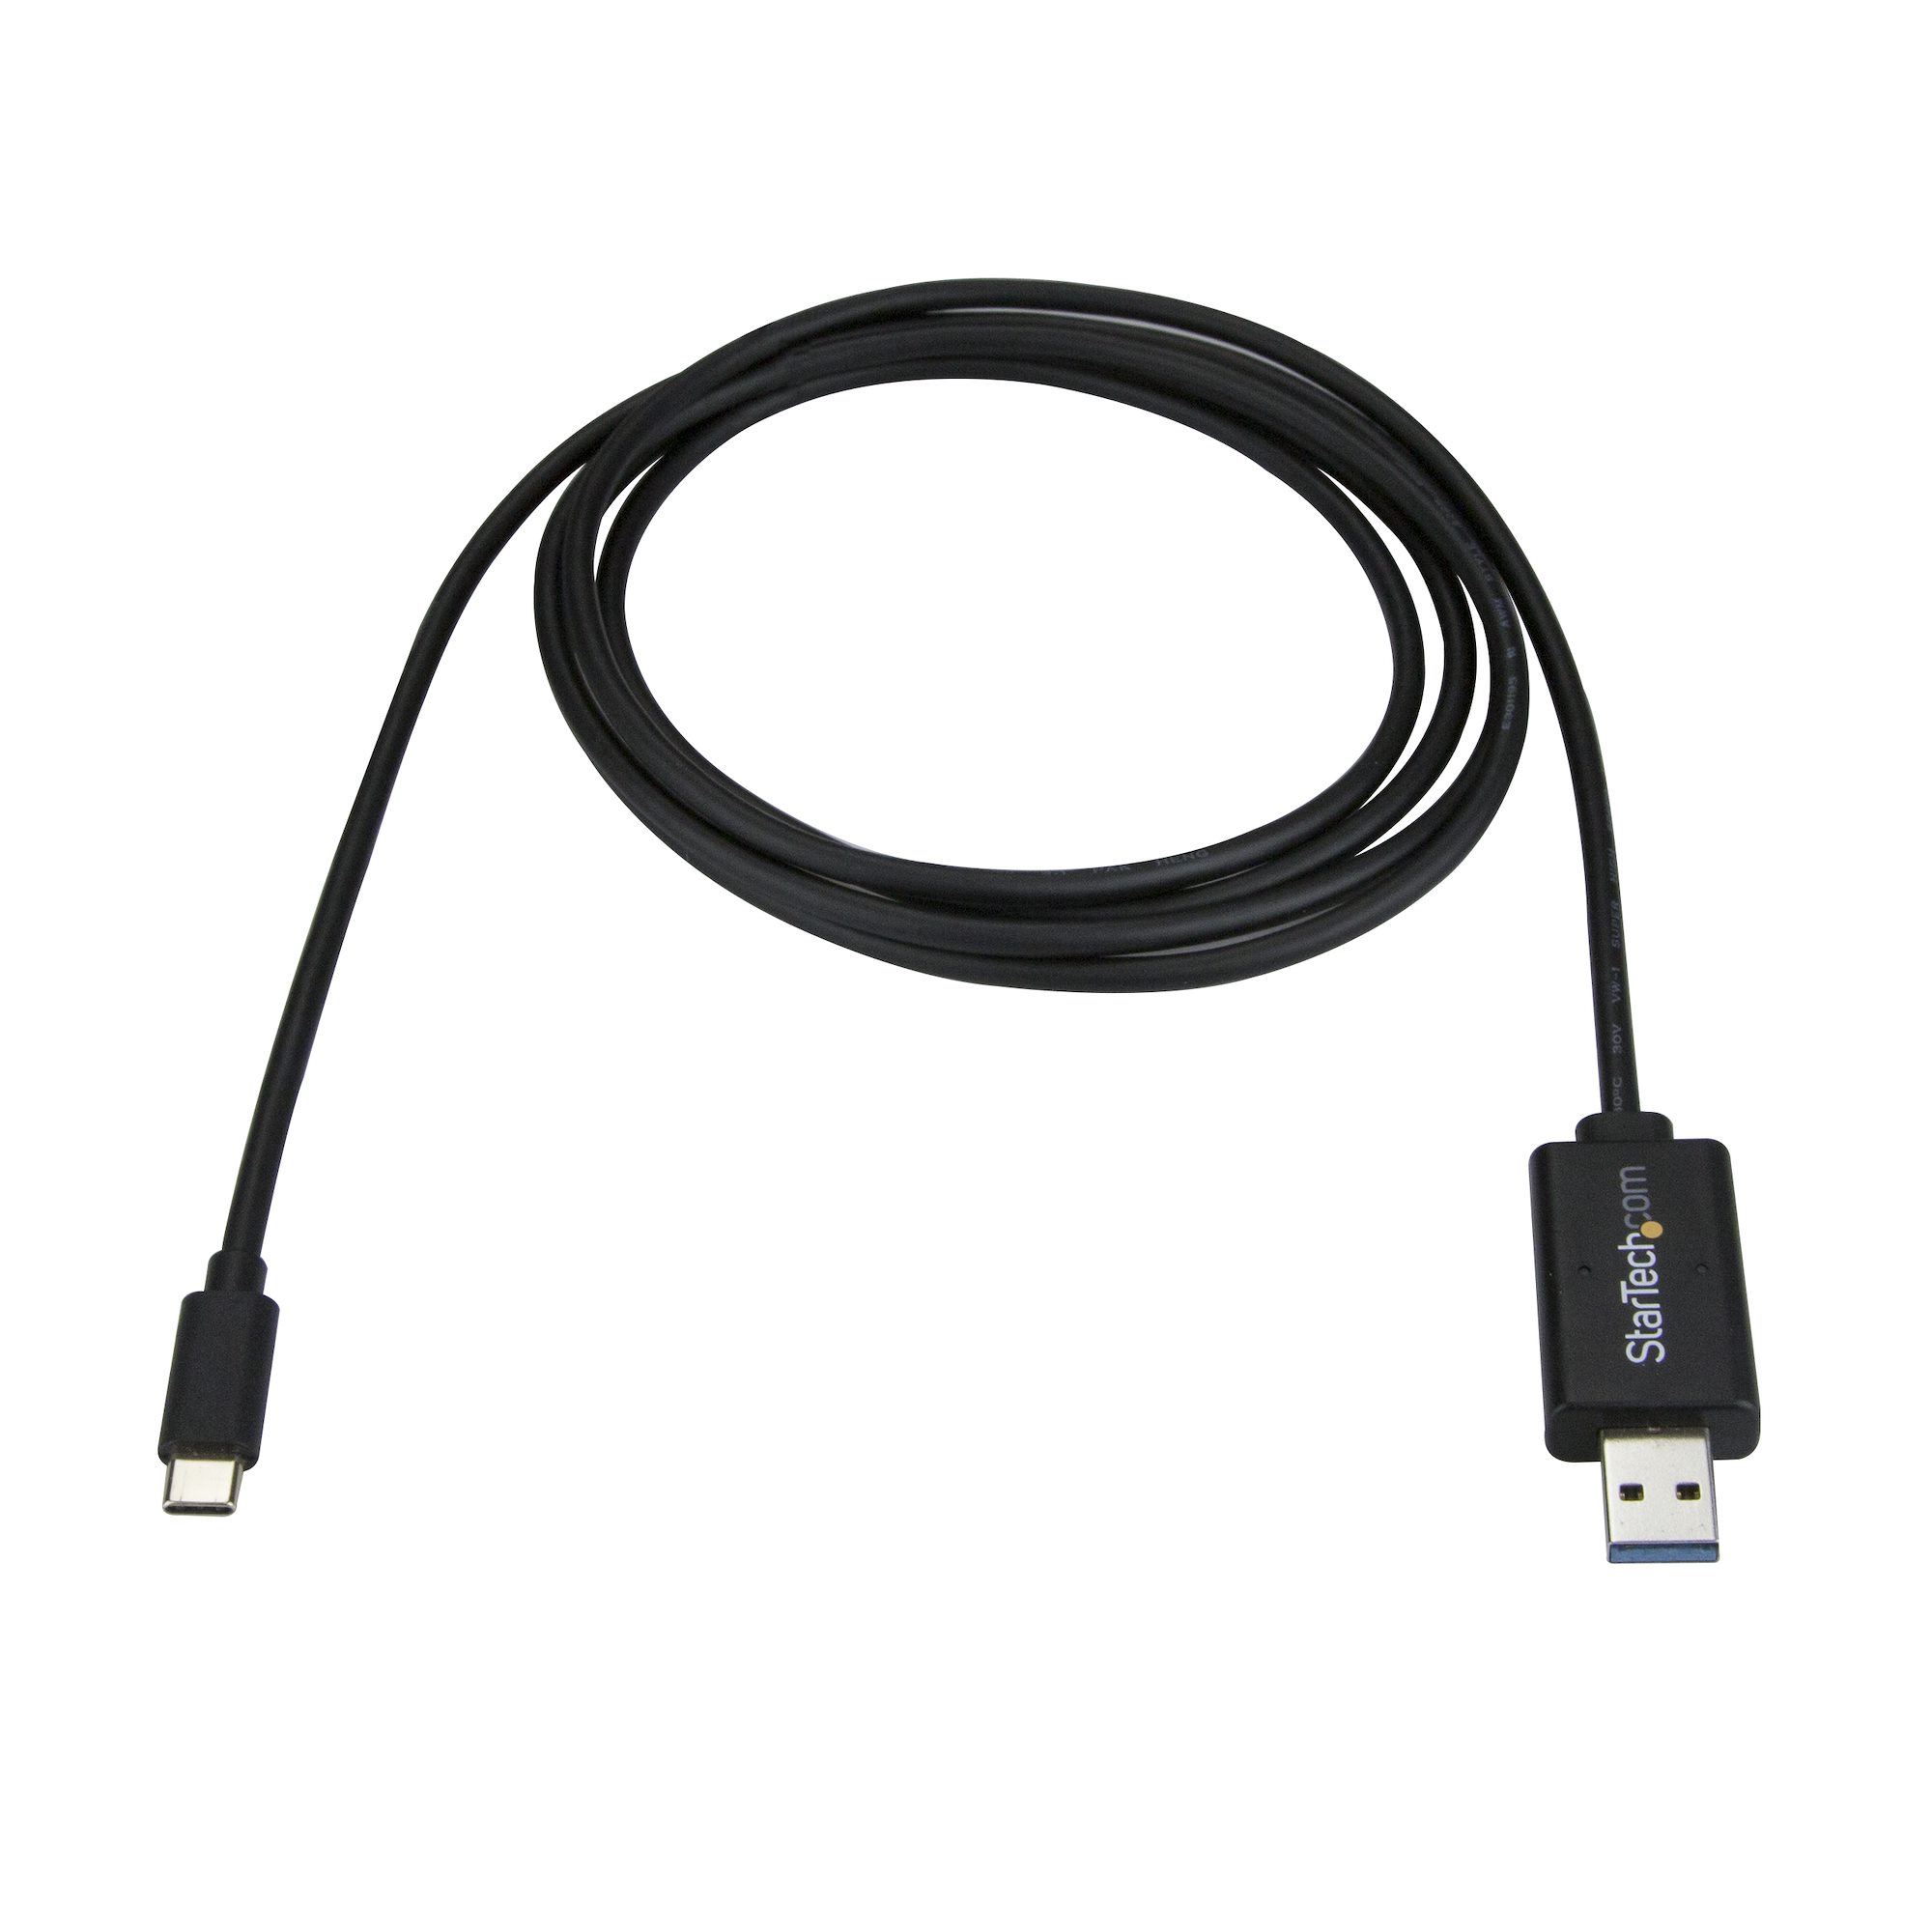 PC to PC Data Link Transfer Cable Laptop PC USB to USB Data Files Transfer  W6O6